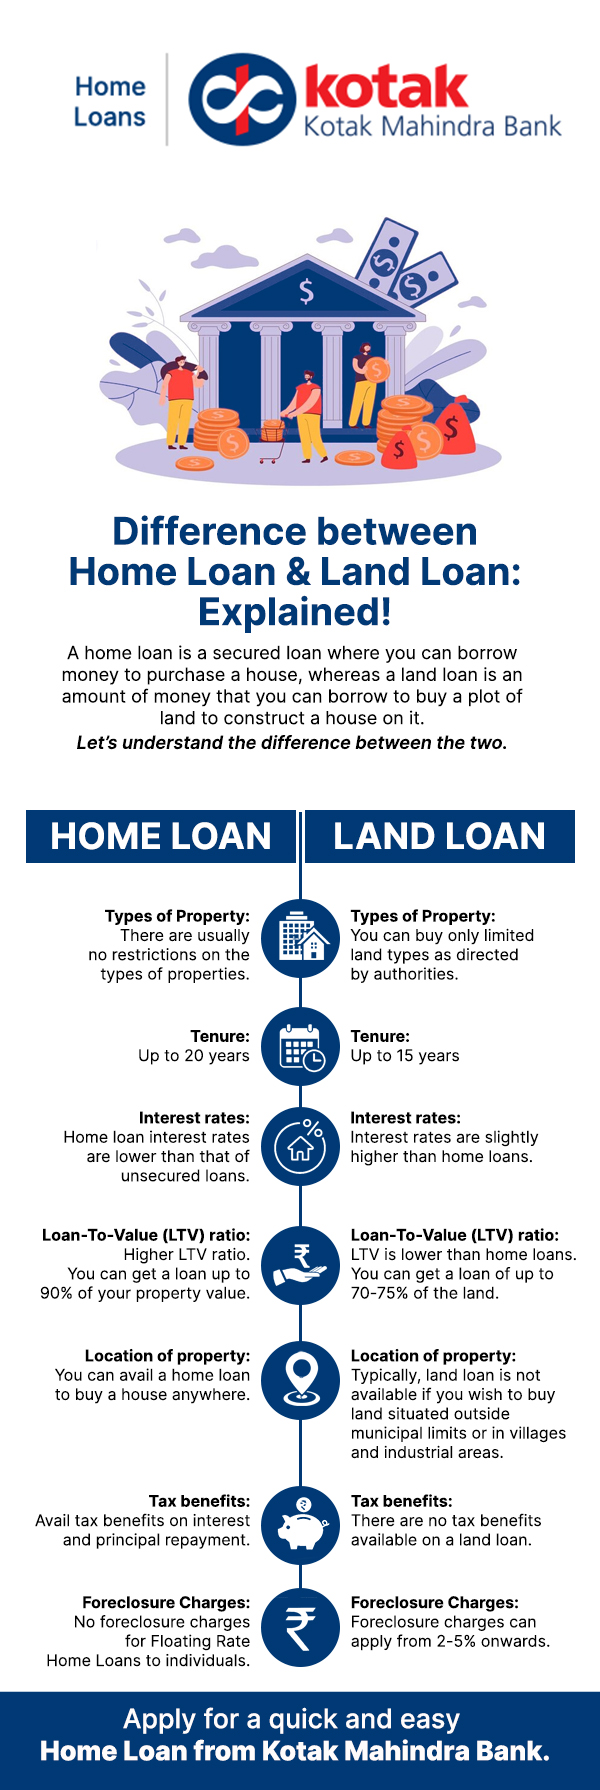 the-real-difference-between-hl-land-loan-explained